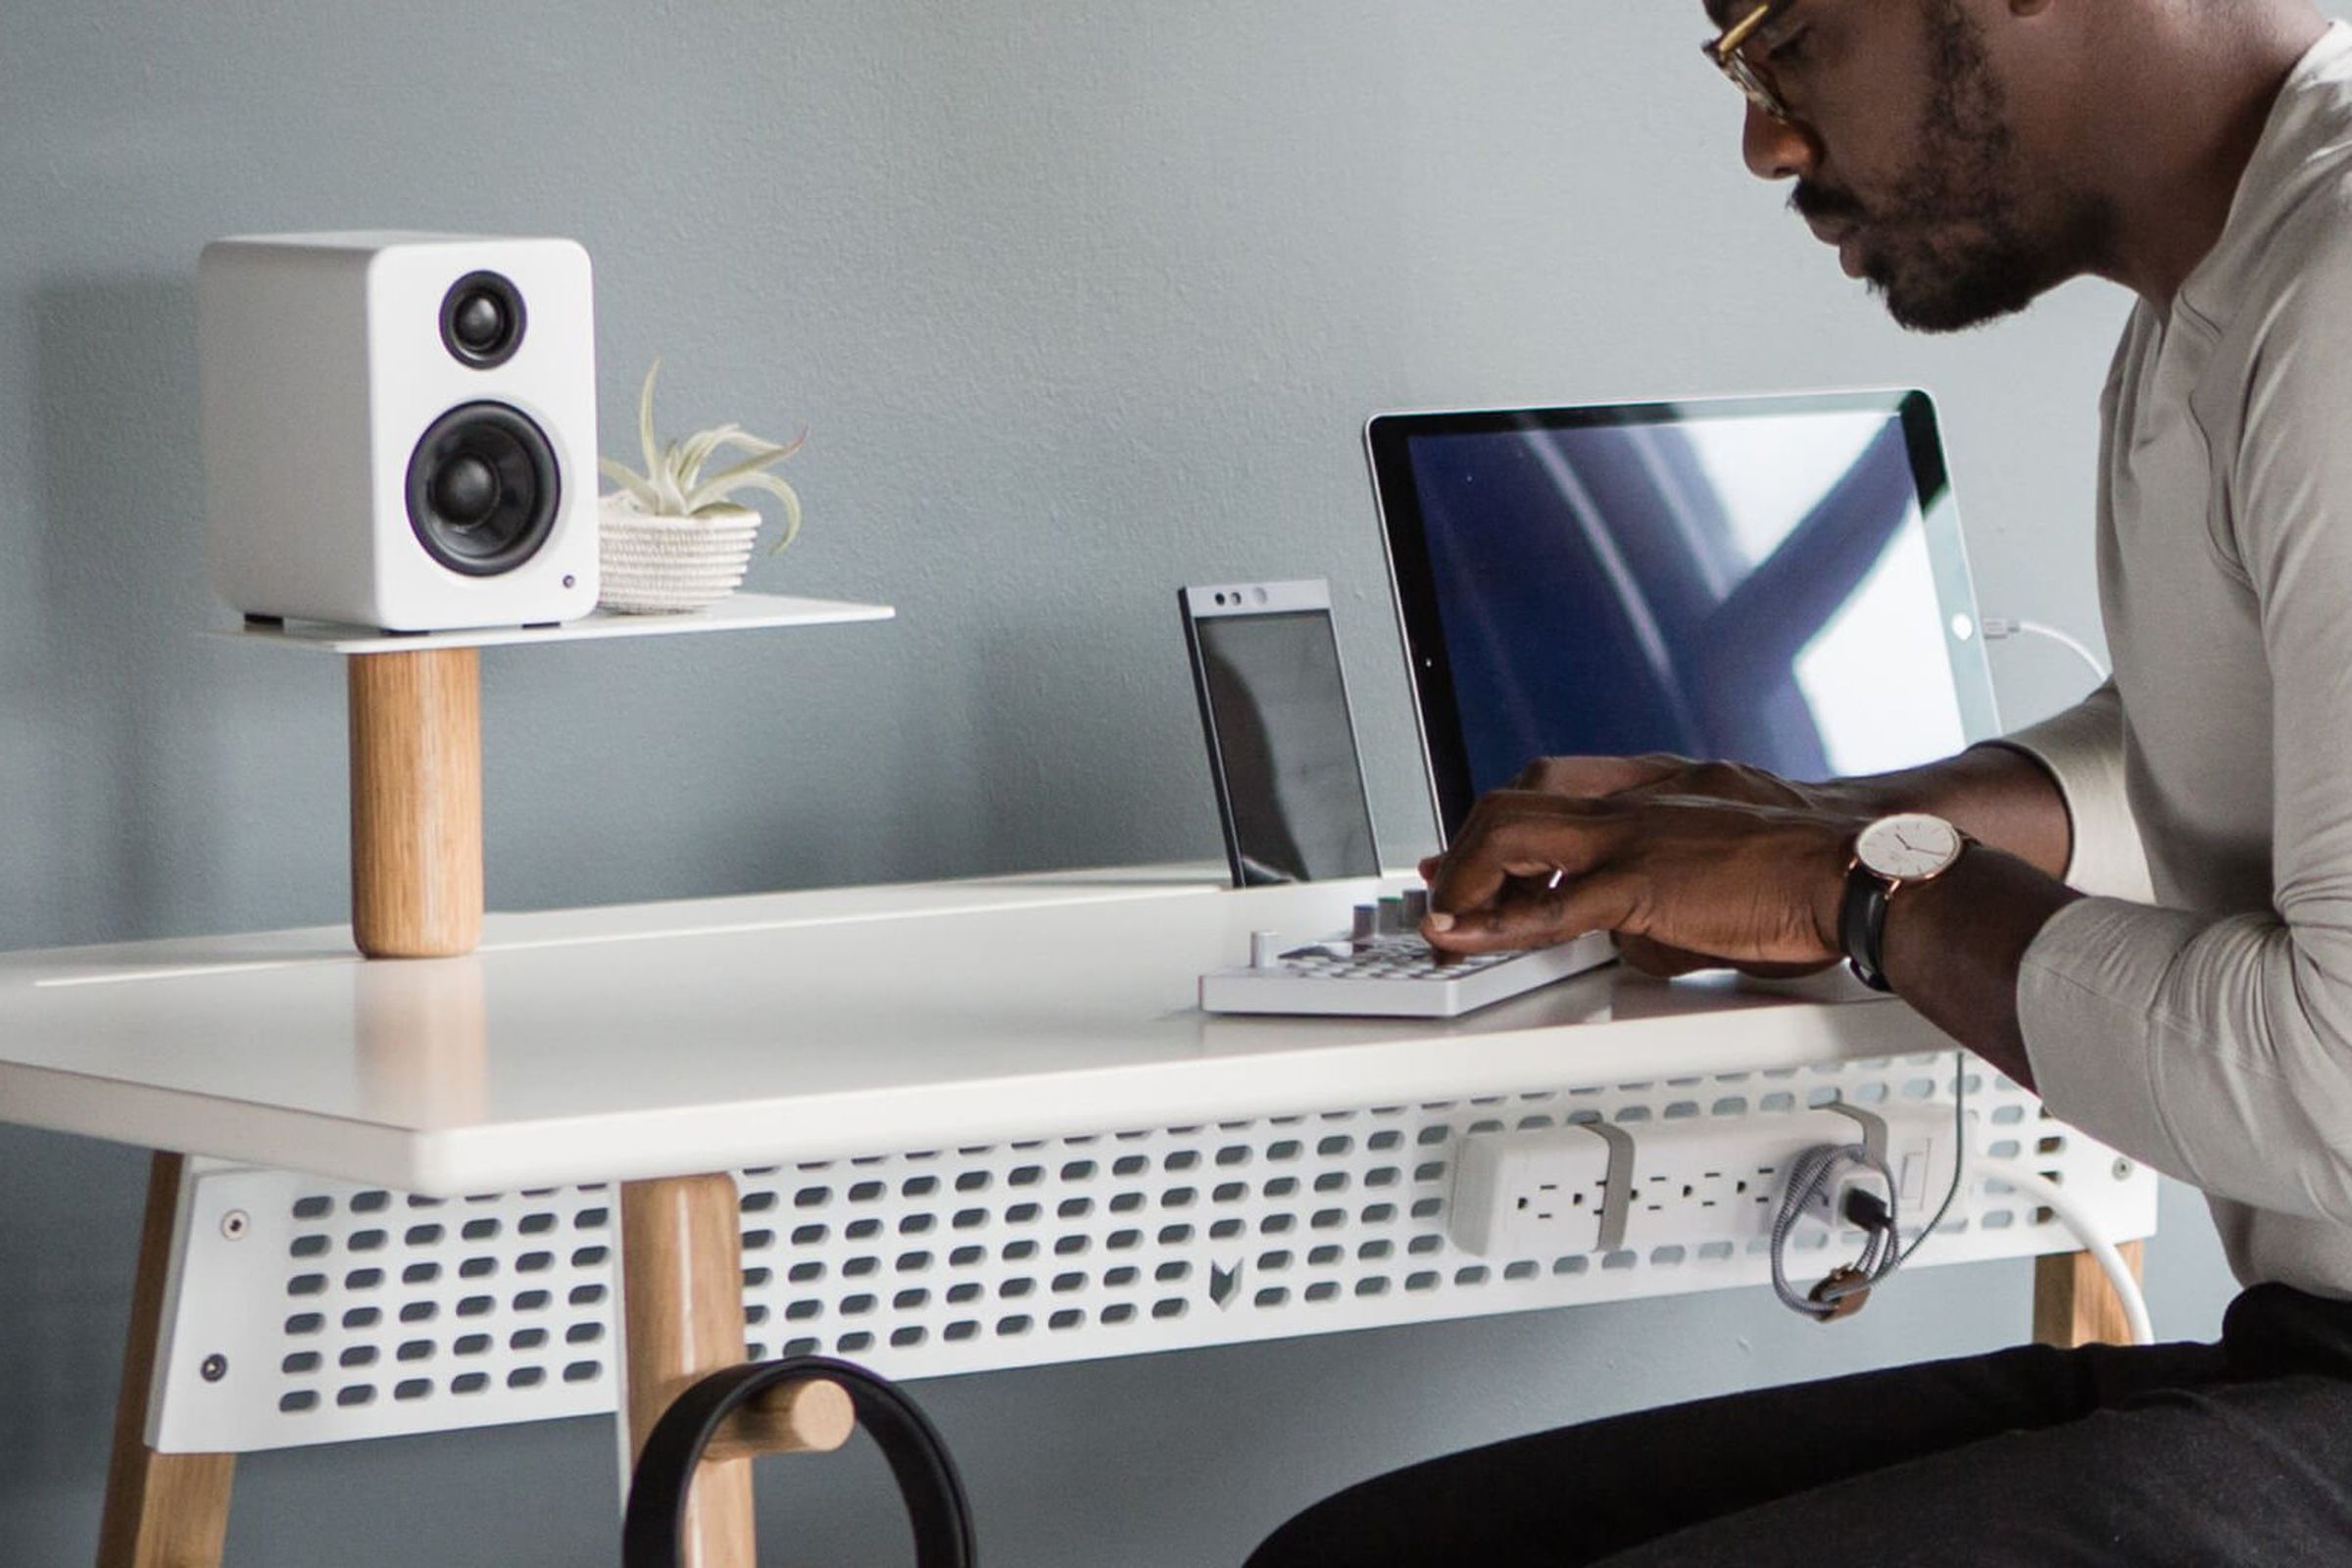 The Kanto YU2 speaker sits on top of a desk while an artist composes sounds with an electronic instrument.